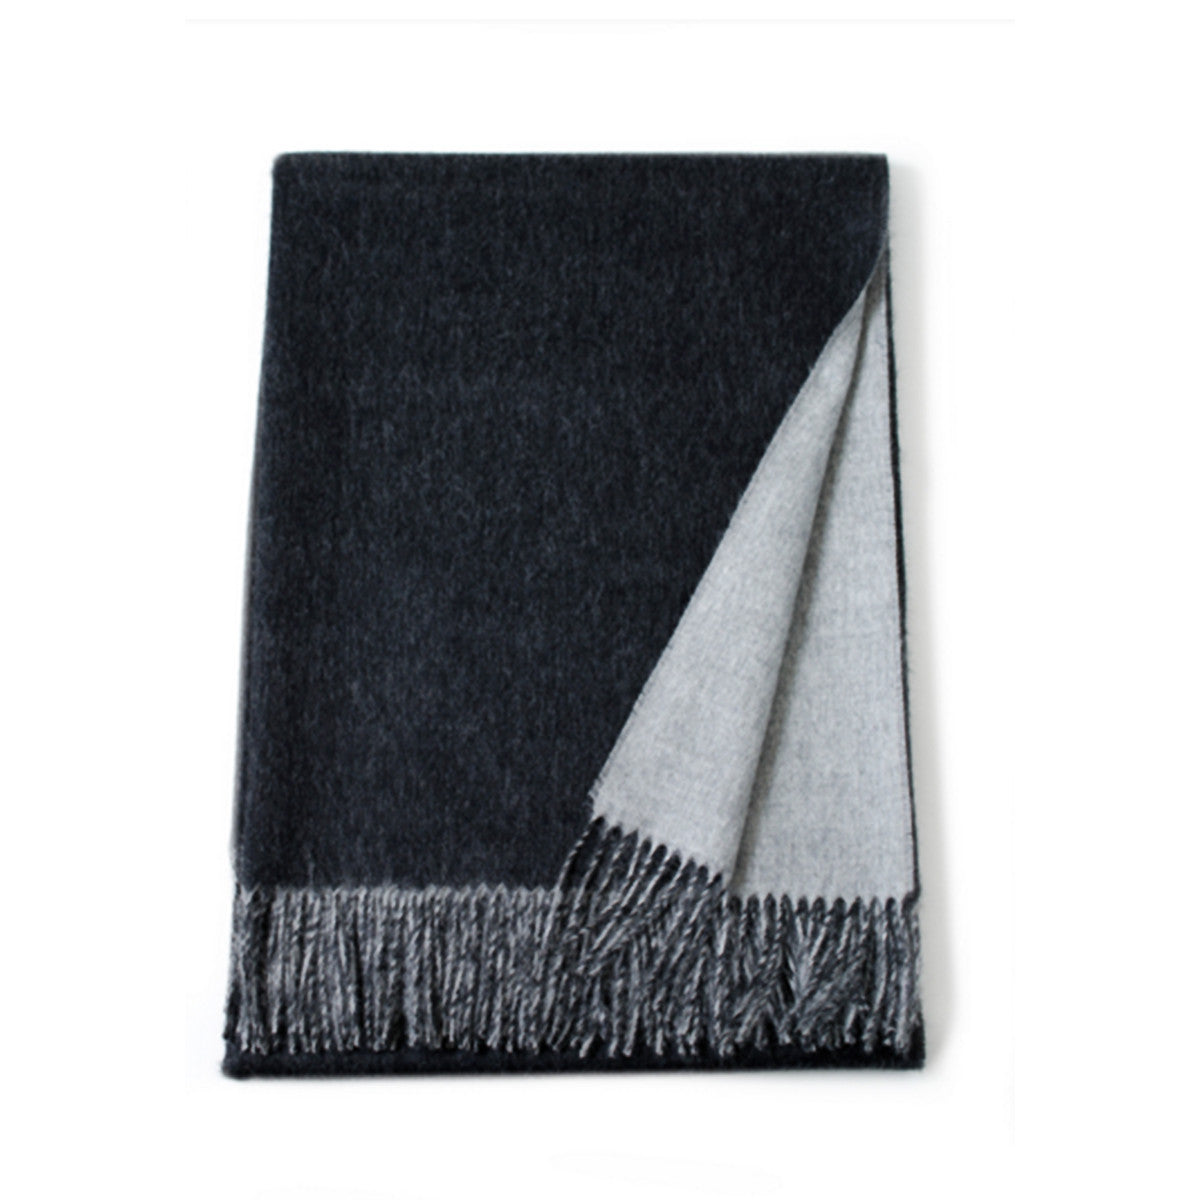 Reversible baby alpaca throws are versatile additions to either your decor or wardrobe.